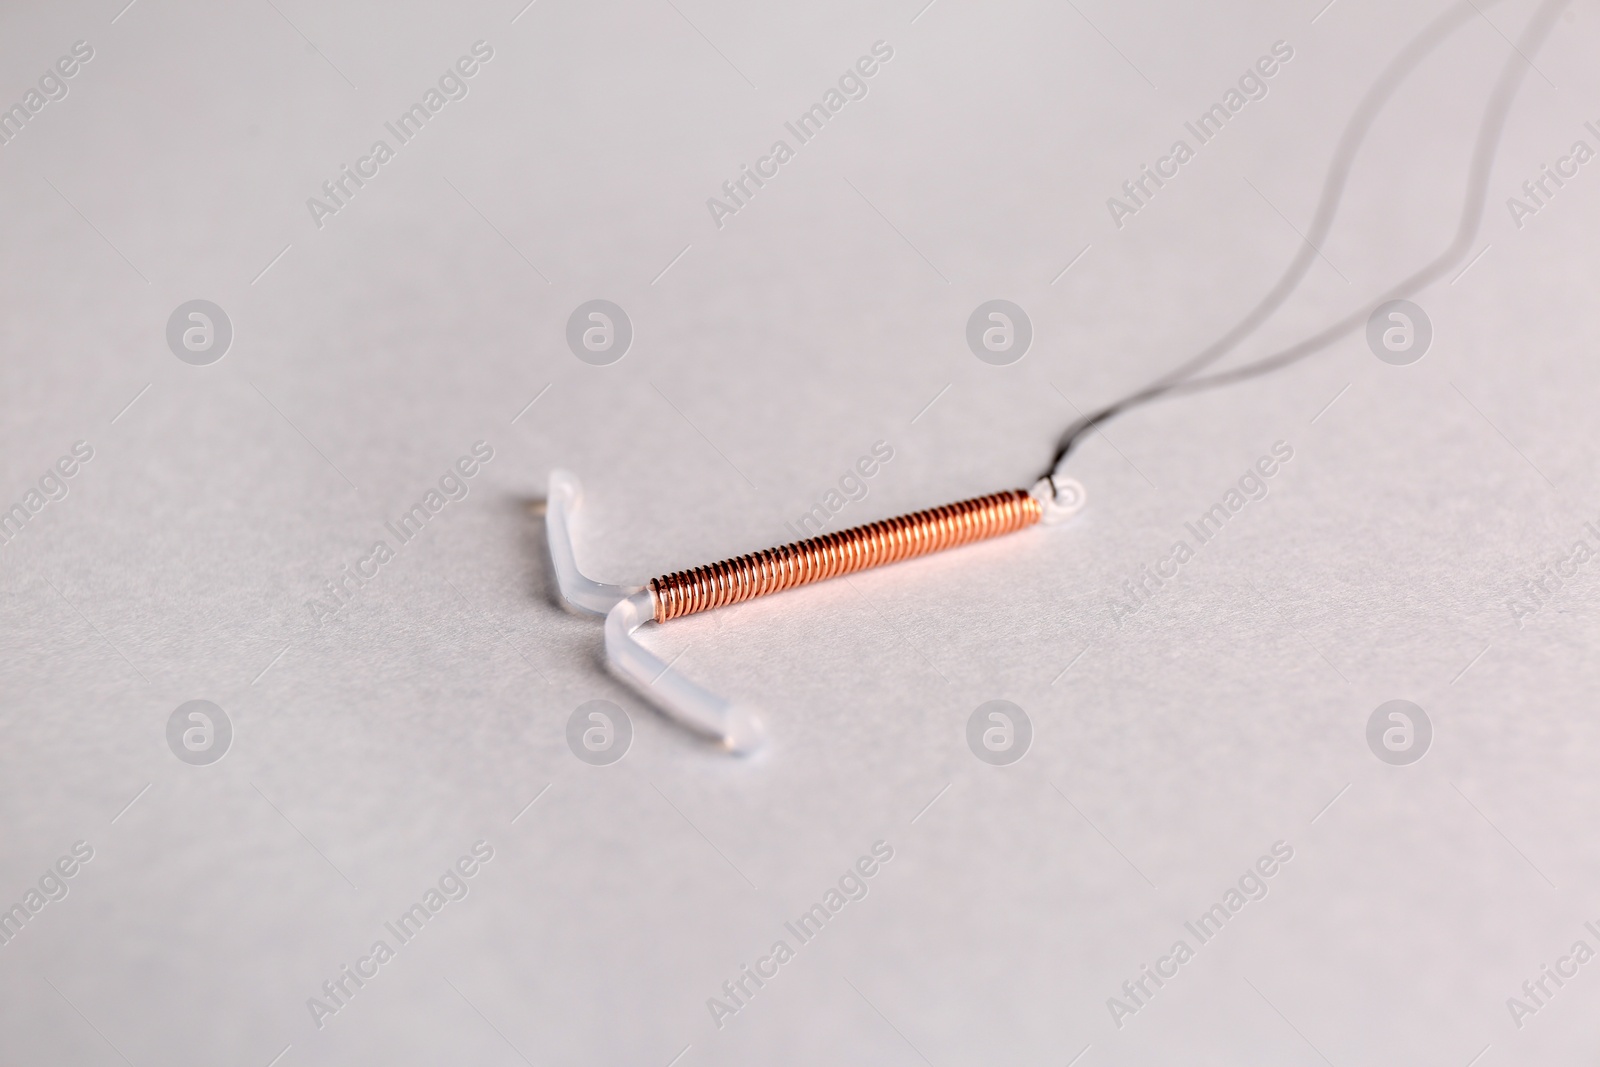 Photo of T-shaped intrauterine birth control device on light background